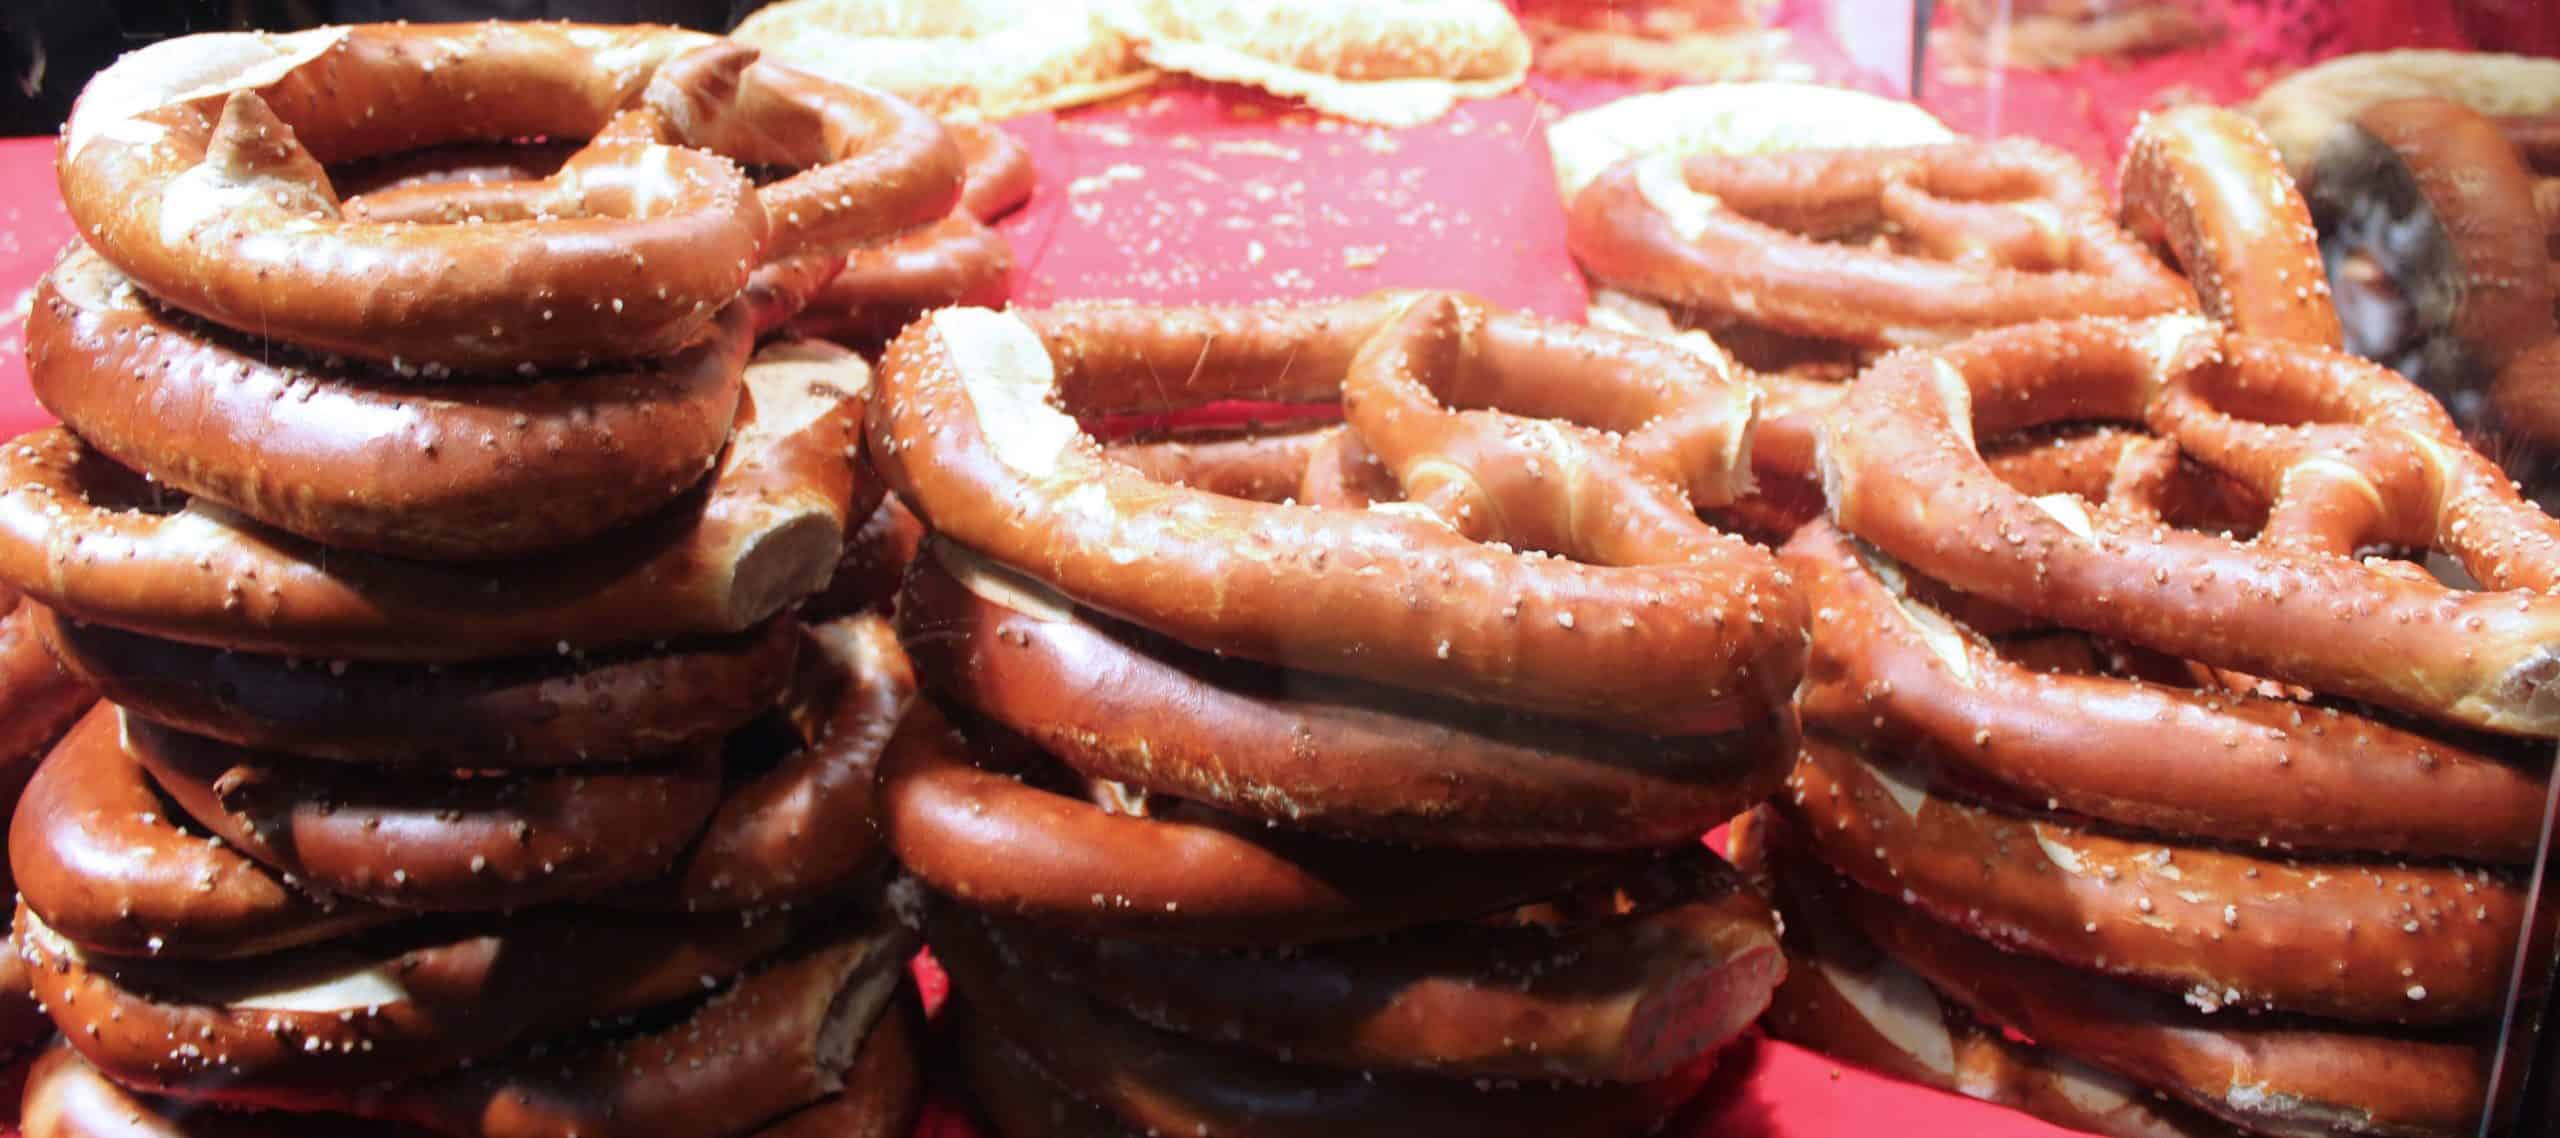 Pretzels being sold at the German Christmas Market 